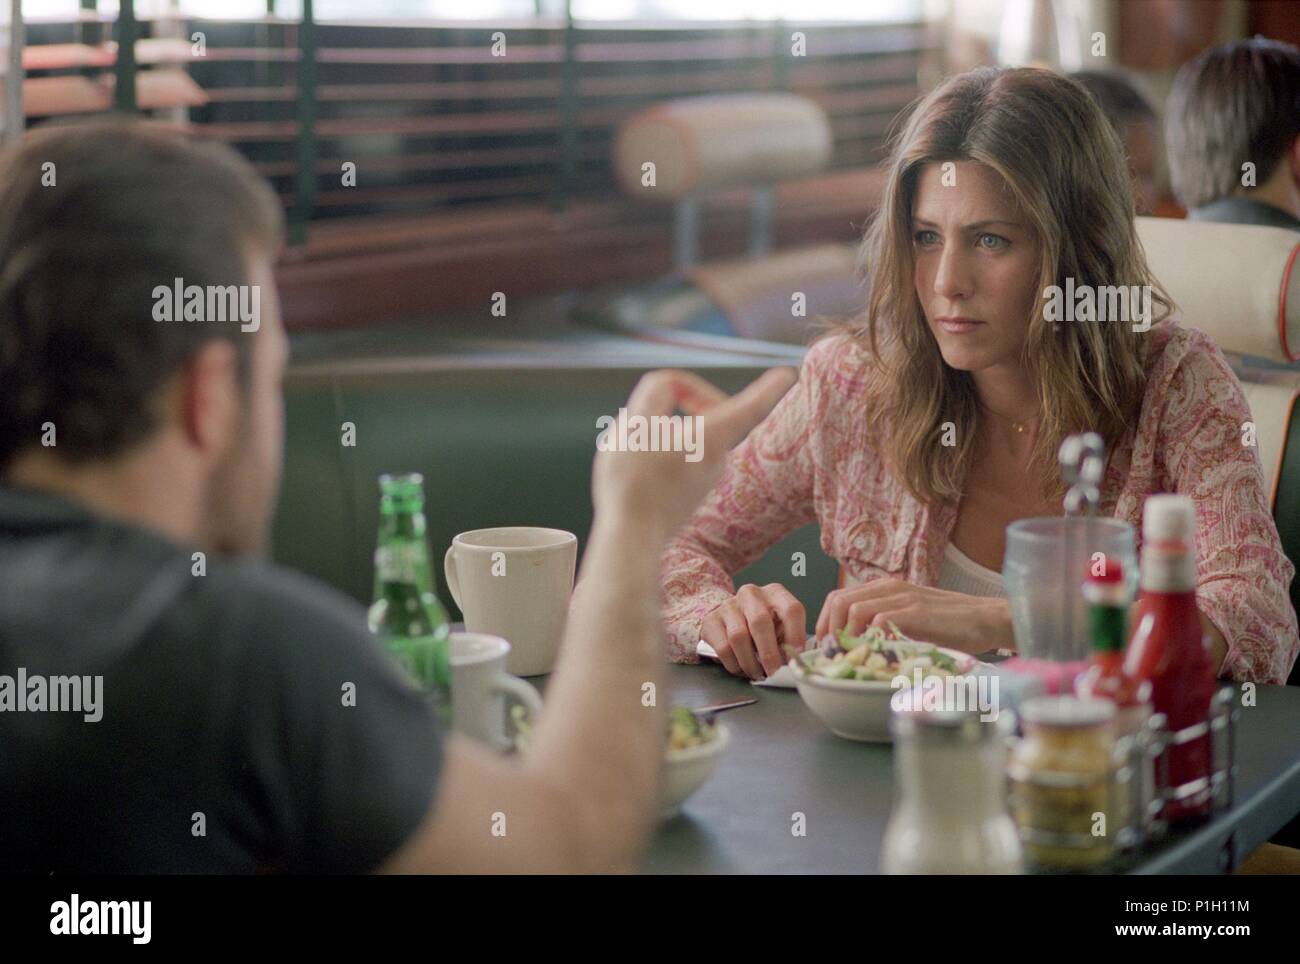 Original Film Title: FRIENDS WITH MONEY.  English Title: FRIENDS WITH MONEY.  Film Director: NICOLE HOLOFCENER.  Year: 2006.  Stars: JENNIFER ANISTON. Credit: THIS IS THAT PRODUCTIONS / Album Stock Photo